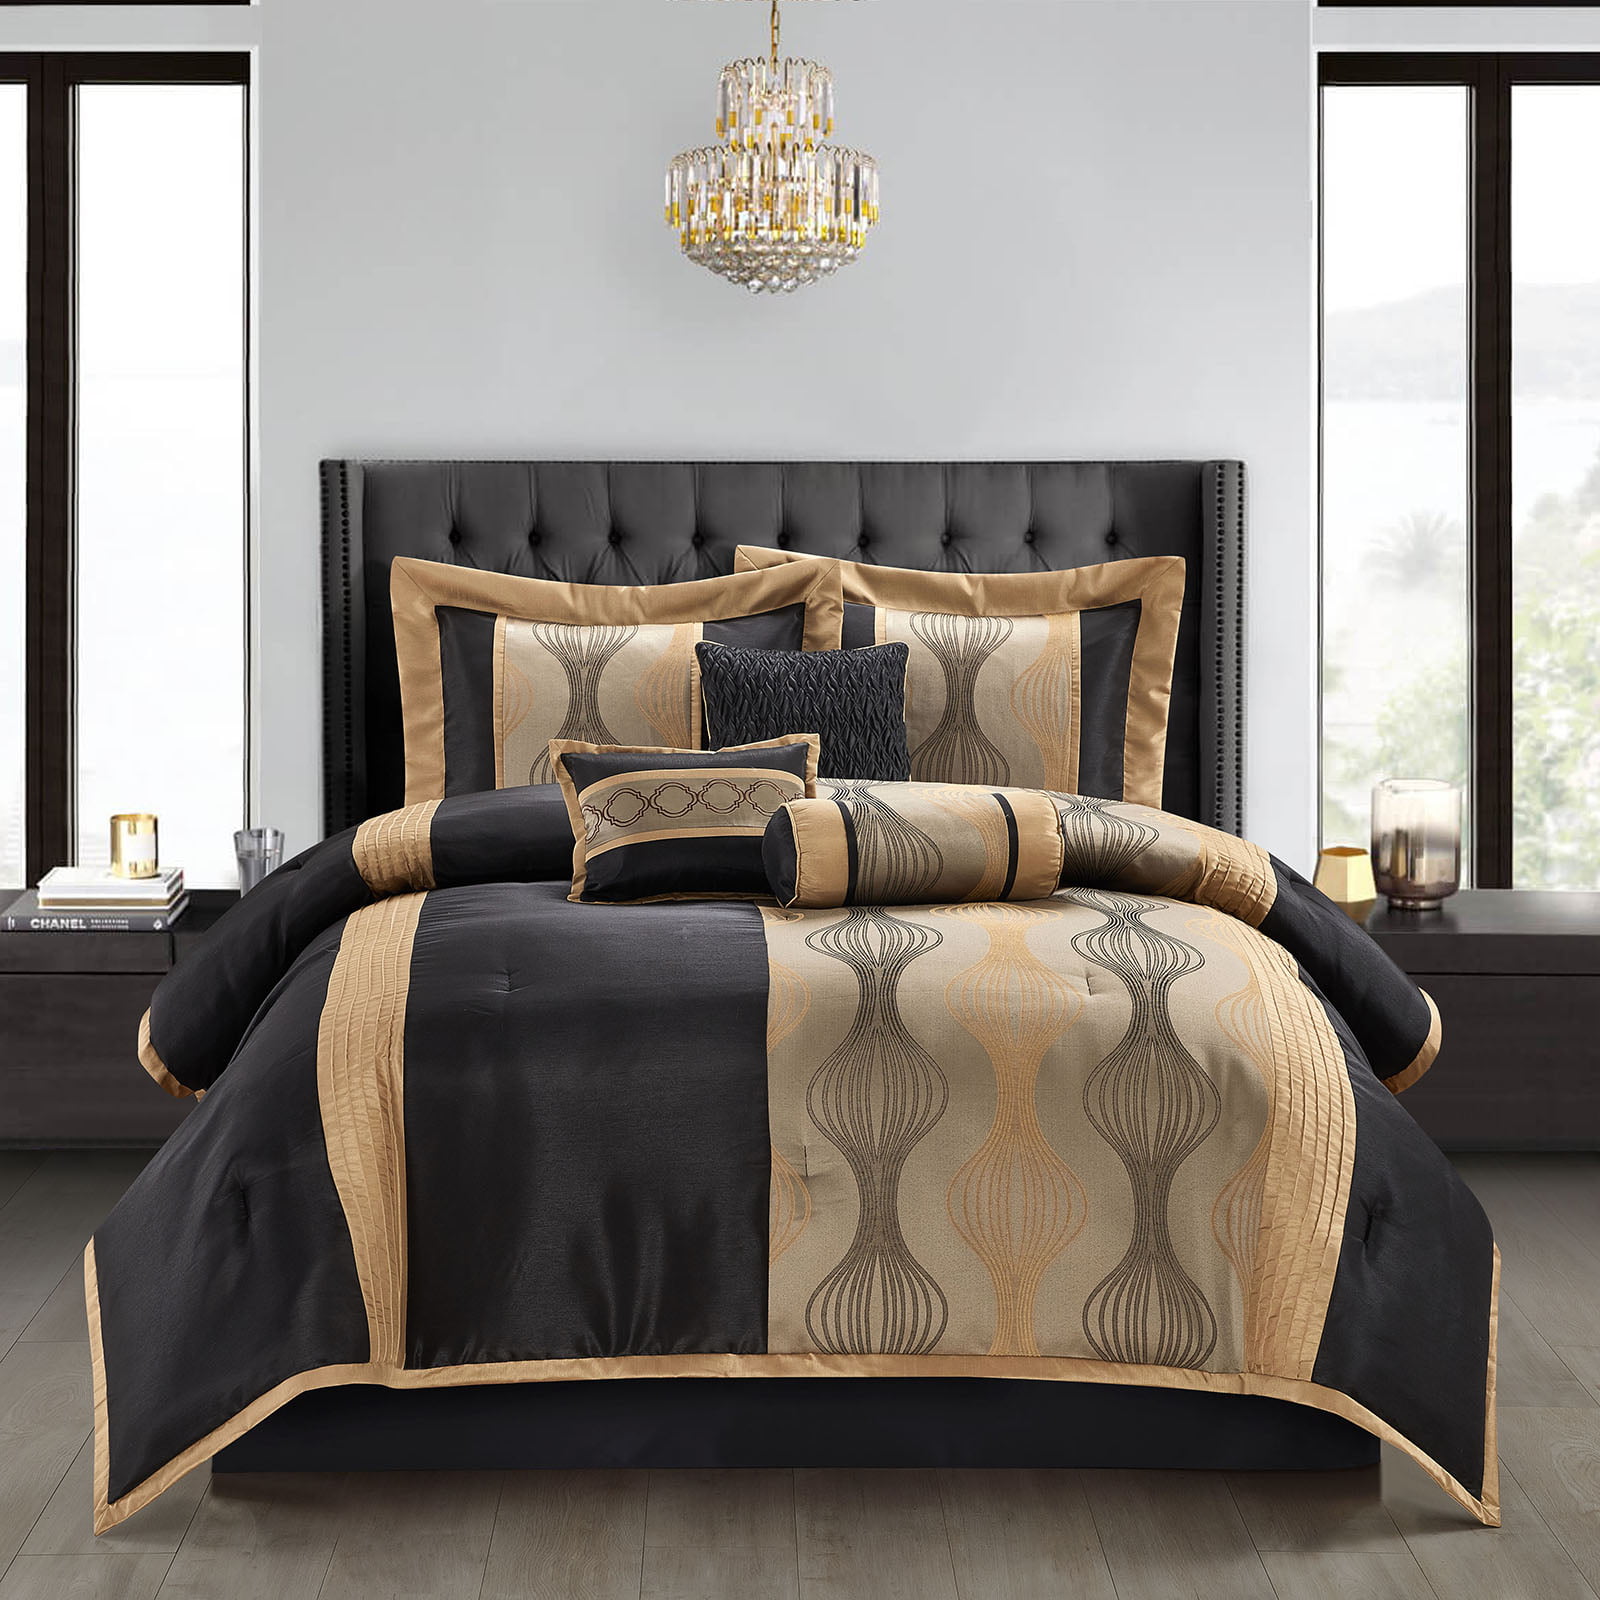 Lanco Elegant Black and Gold Comforter Set,Striped, 7 Pieces Jacquard  Bedding Sets with Comforter for All Season, Bed Skirt, Pillows & Shams,  Queen